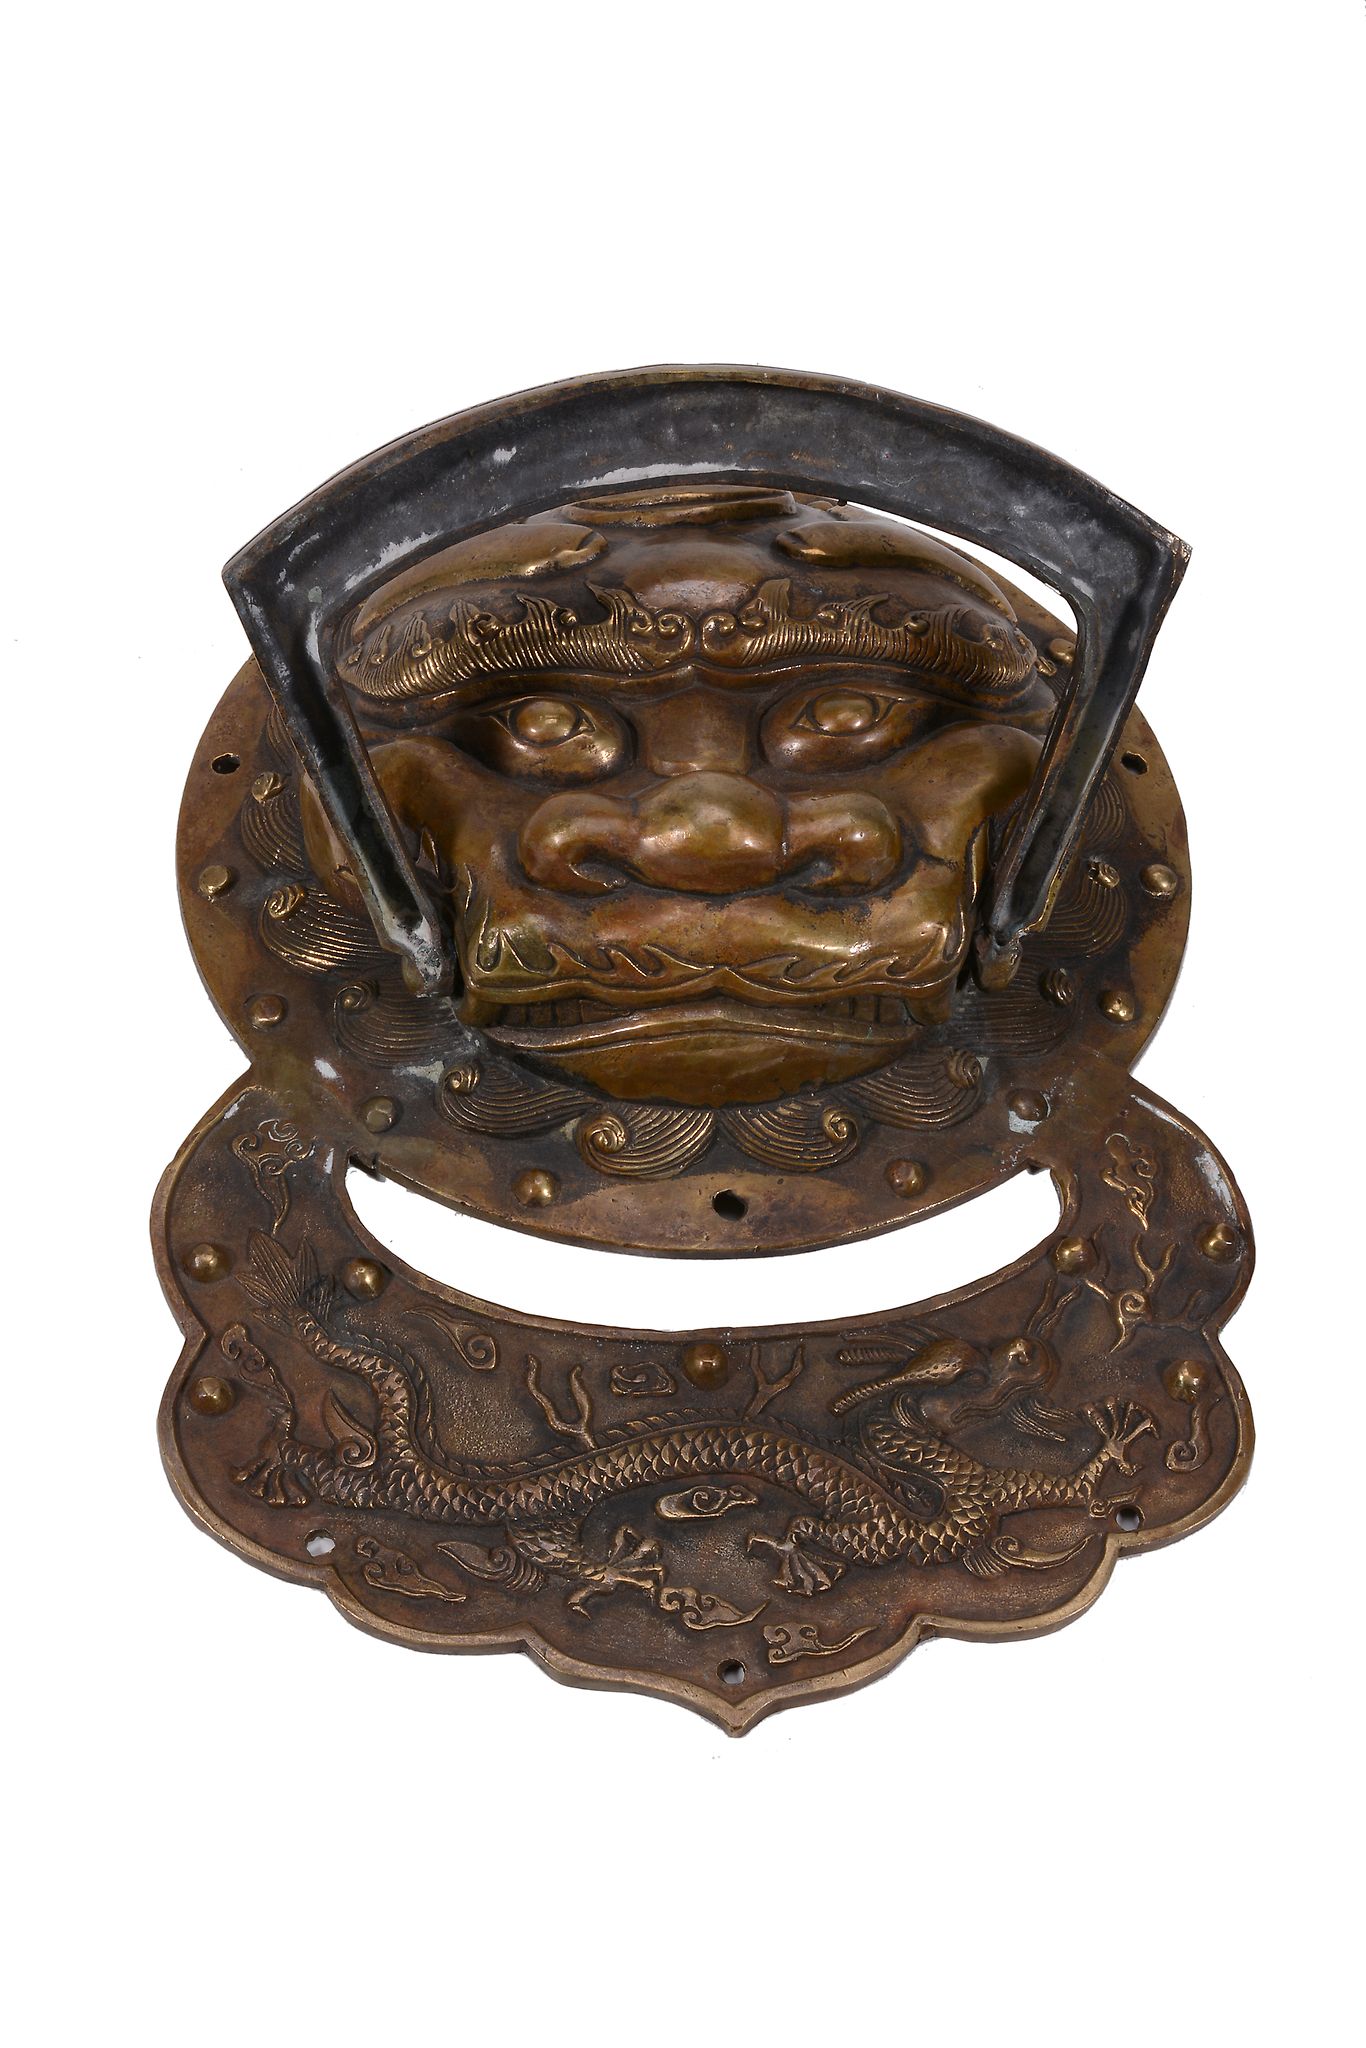 A Chinese bronze door knocker, Qing Dynasty, 19th century  A Chinese bronze door knocker, Qing - Image 4 of 4